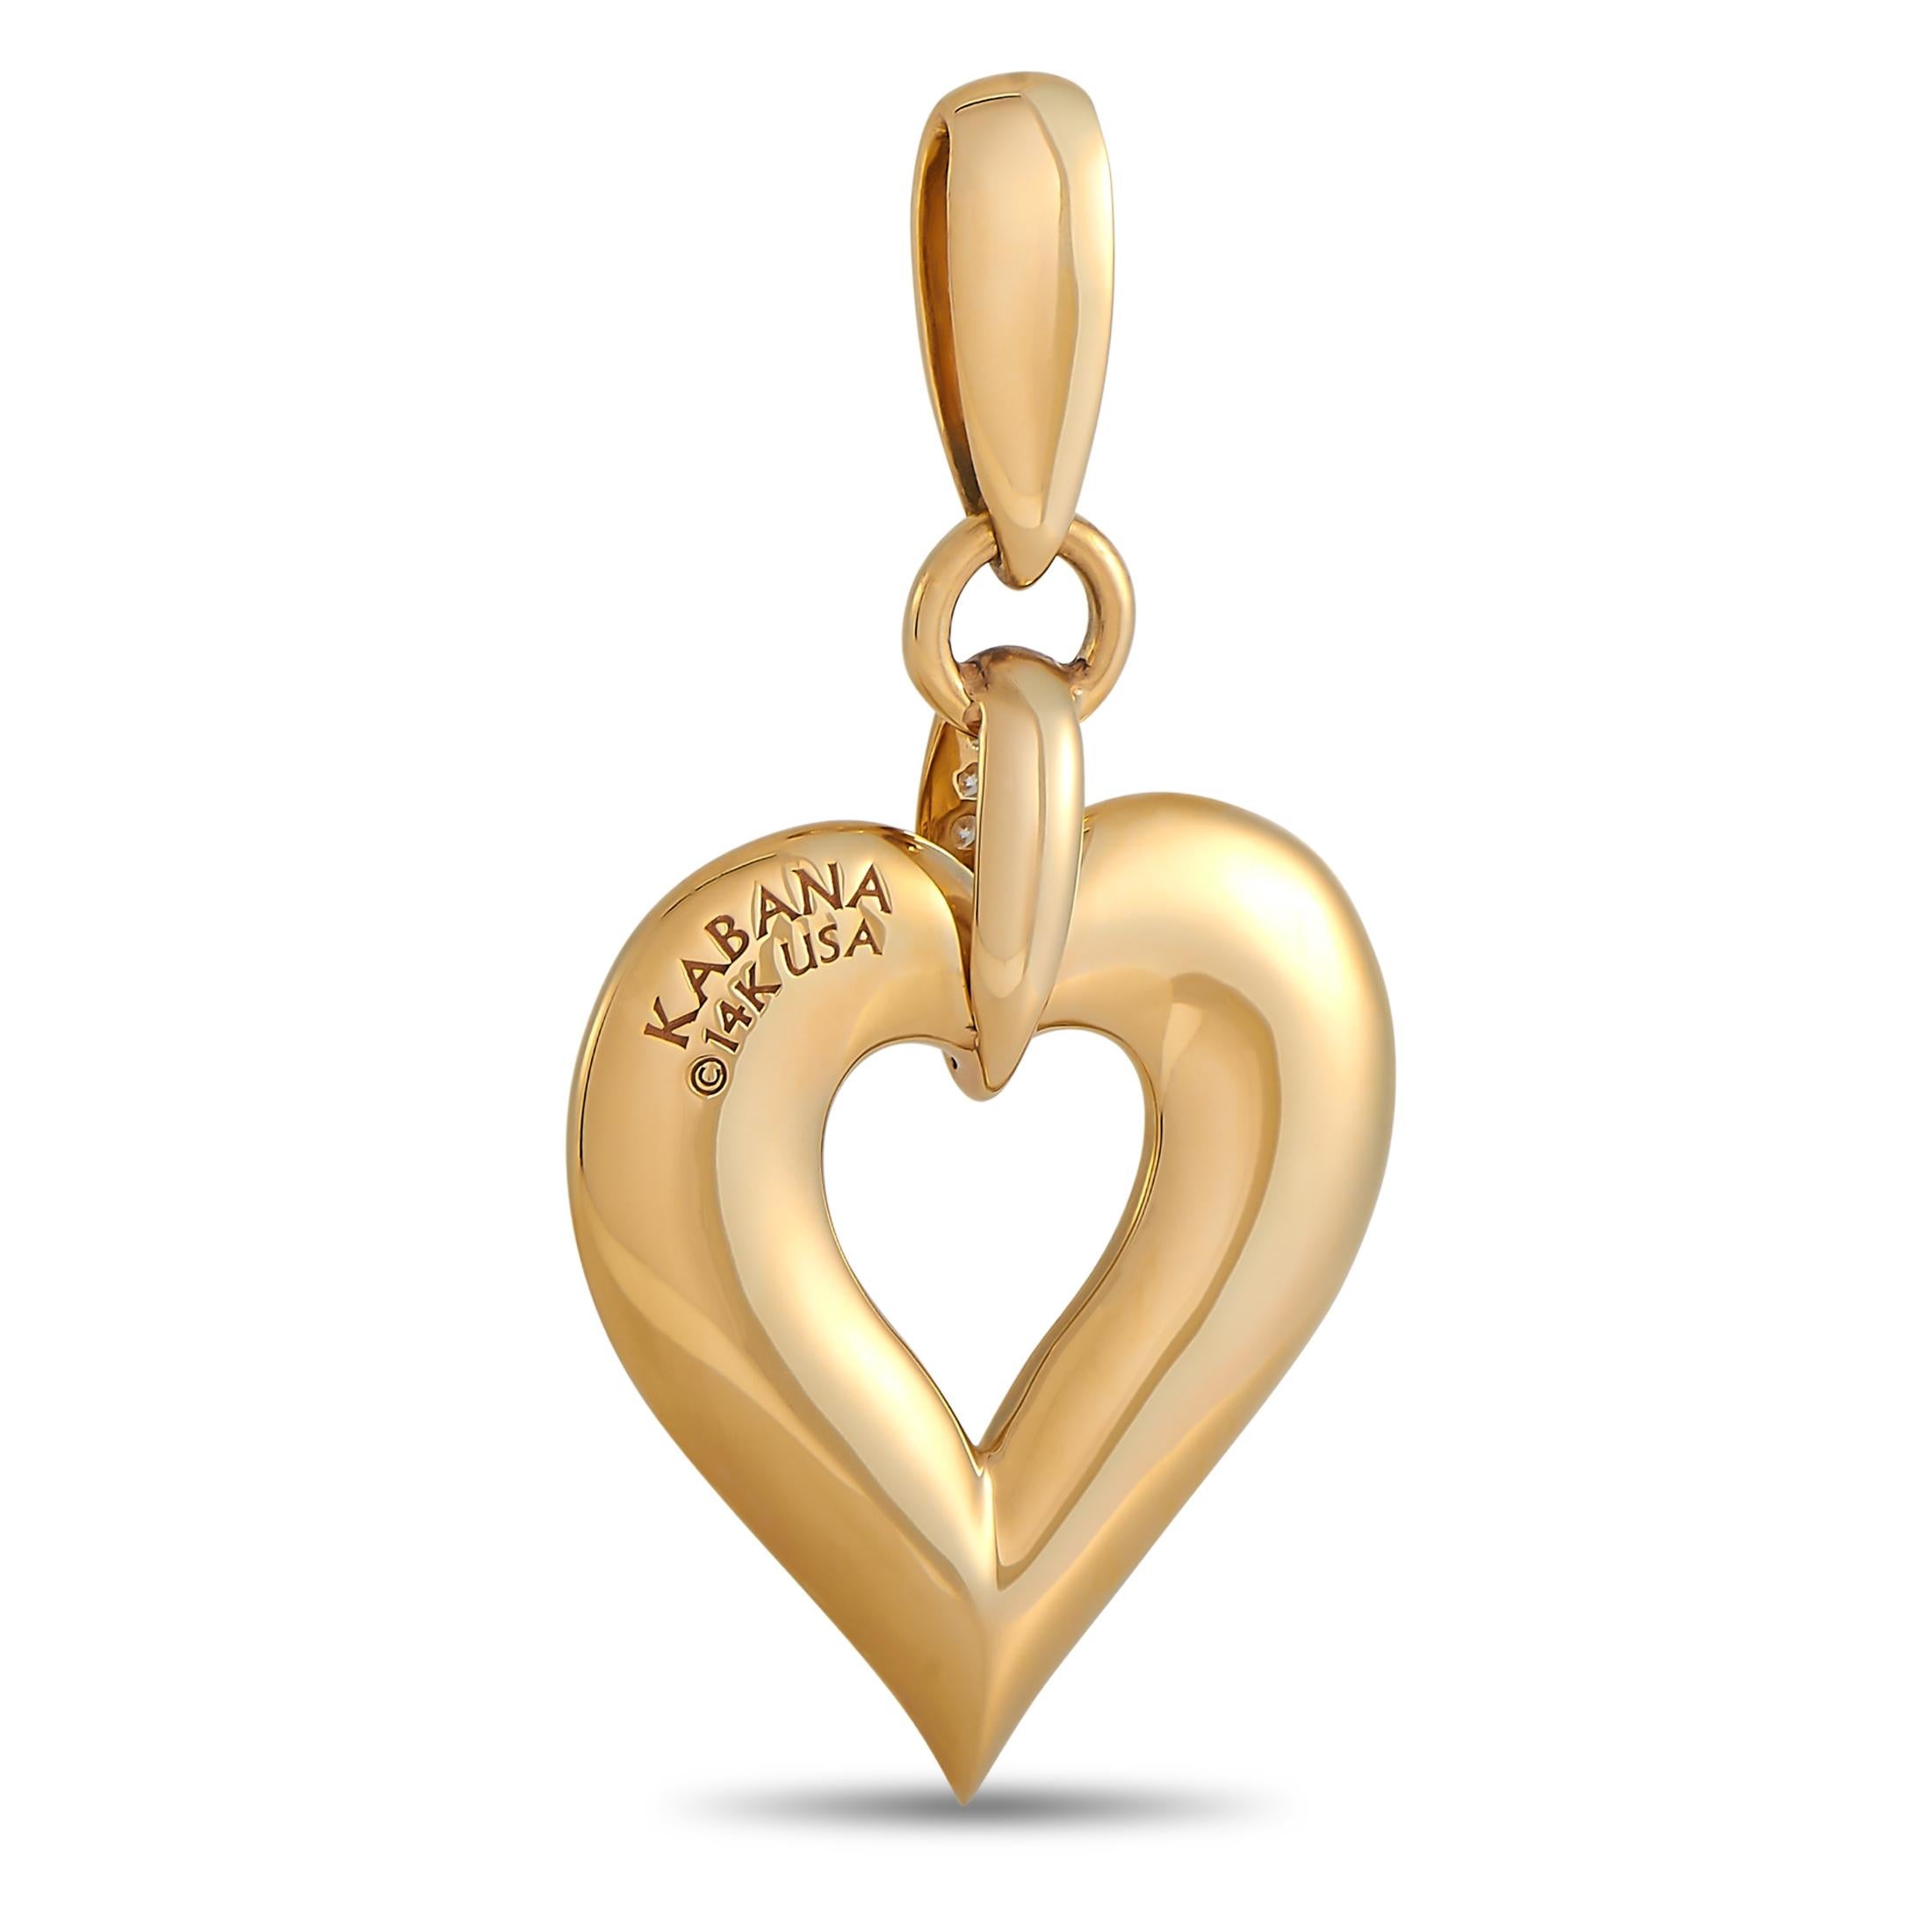 An elegant piece of jewelry with a touch of unique and organic style. This pendant measures 2-inches by 1.15-inches and features a heart-shaped silhouette with open center. The heart pendant is finished with a rainbow mother of pearl inlay paired